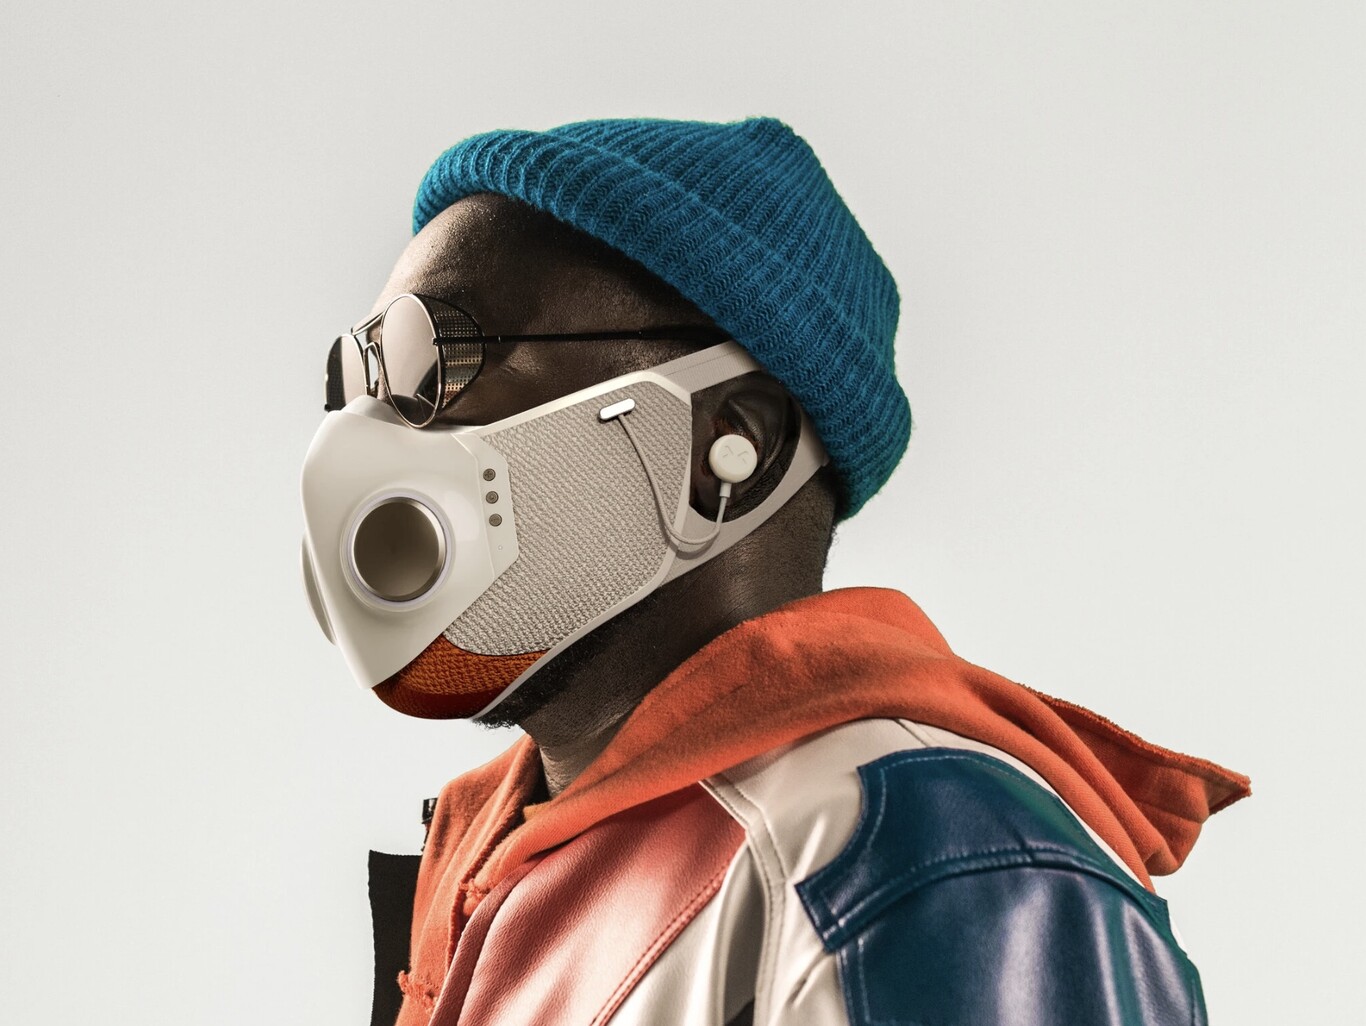 Xupermask, the mask designed by will.i.am and Honeywell that comes with HEPA filters, LED lights and even integrated headphones